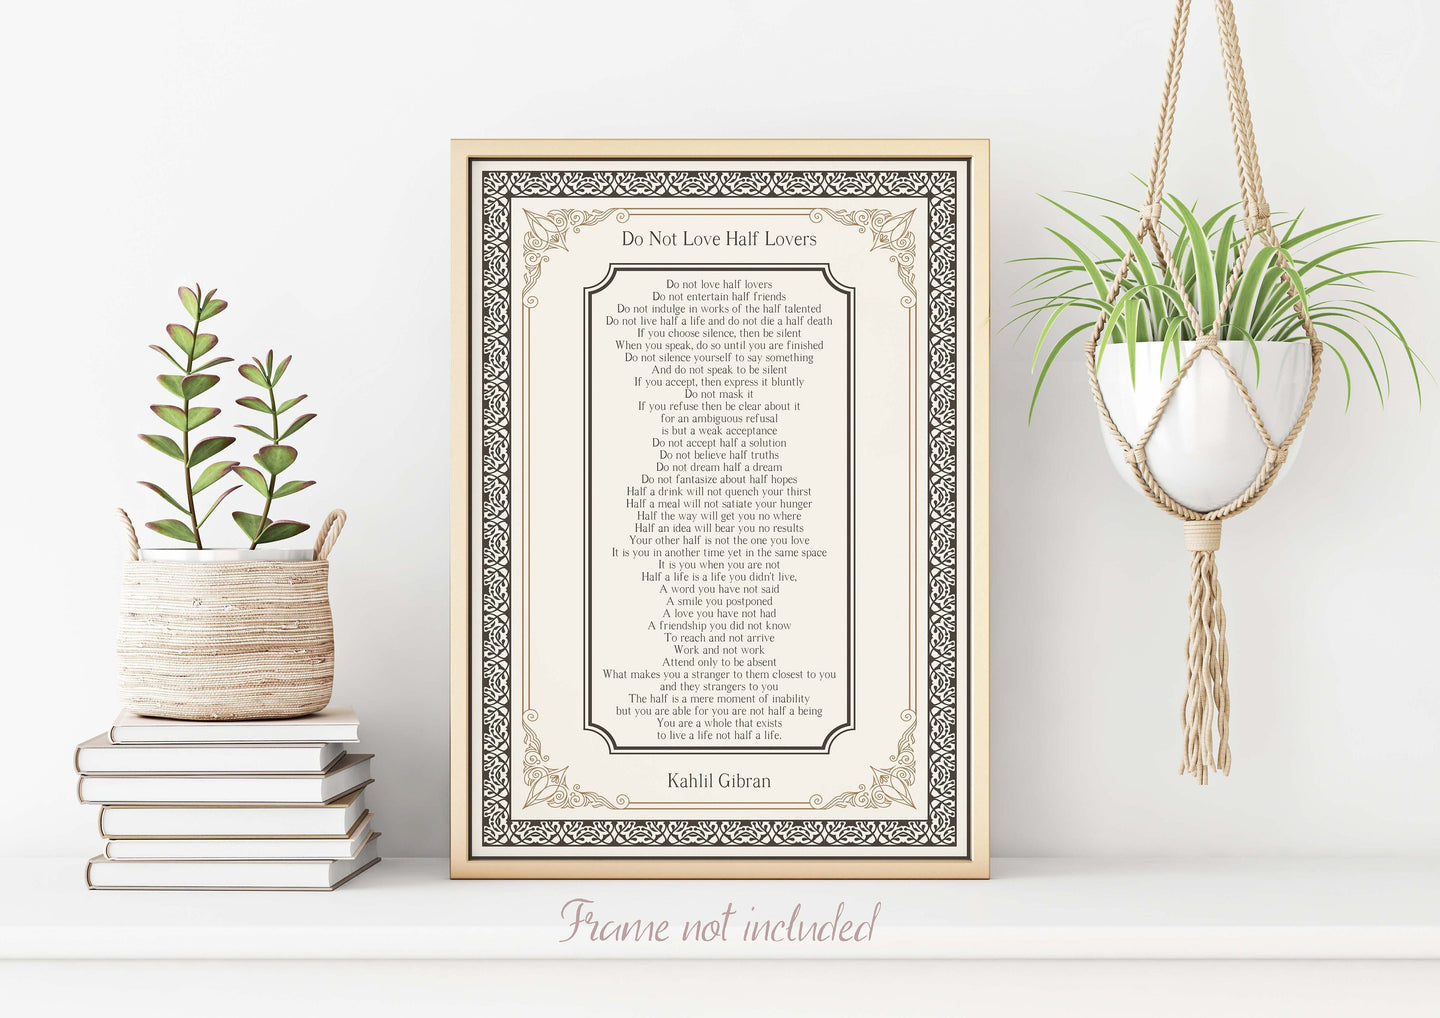 Do Not Love Half Lovers by Kahlil Gibran Poem - Victorian Style Wall Art Poster Print - Physical Art Print Without Frame